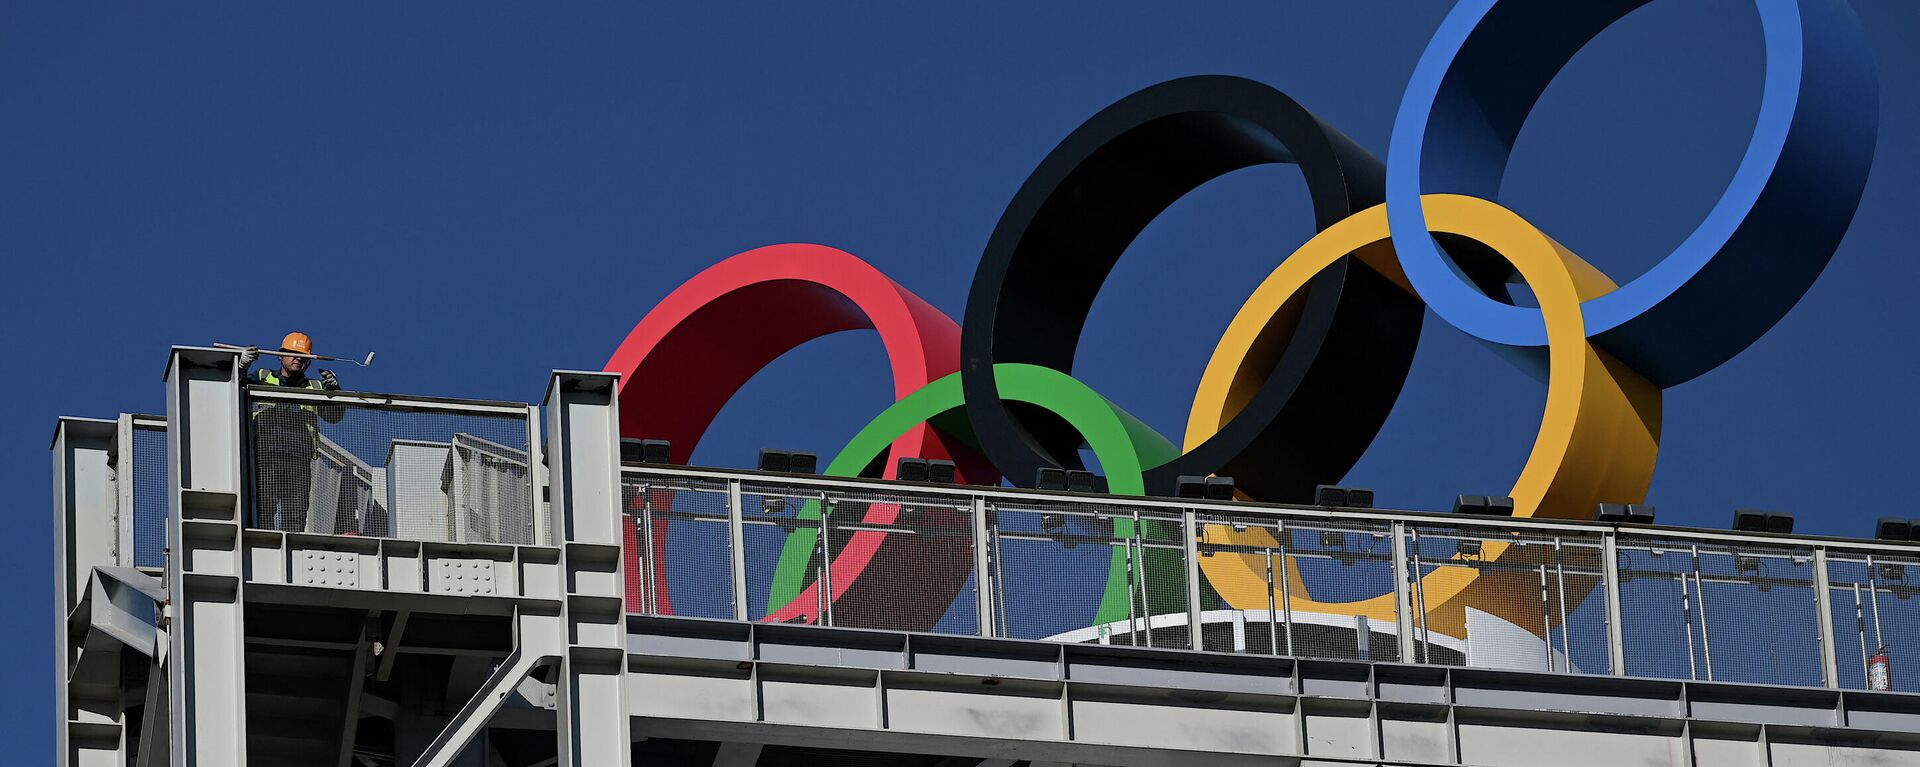 A worker paints a part of a building where the Olympic Rings are located in Shougang Park, one of the sites for the Beijing 2022 Winter Olympics, in December 1, 2021 - Sputnik International, 1920, 09.12.2021